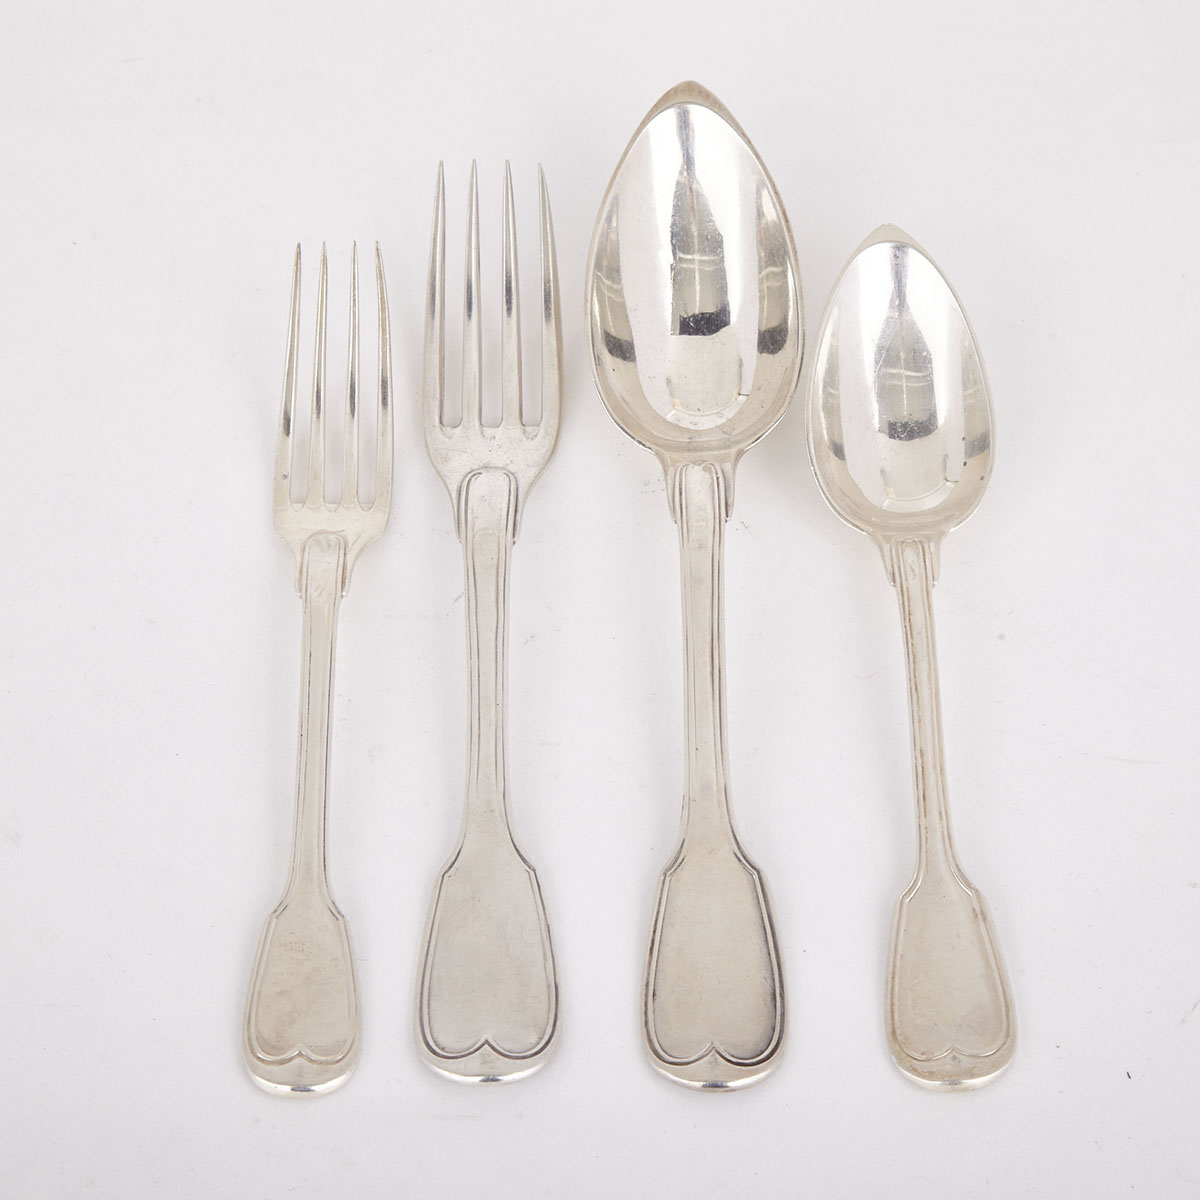 French Silver Fiddle and Thread Pattern Flatware Service, Paris, 19th century